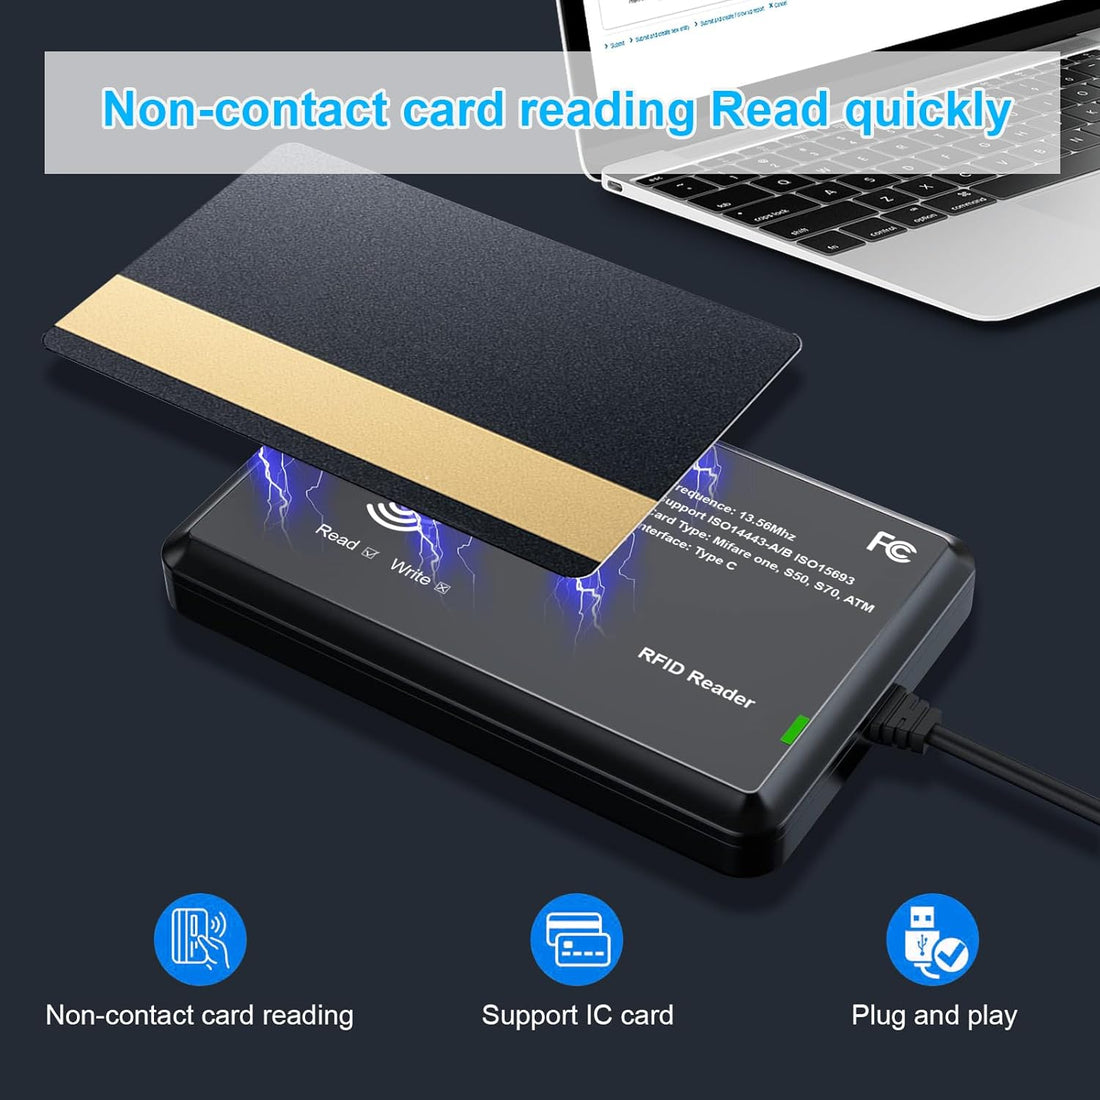 RFID Card Reader 13.56mhz Reader, Support ISO14443-A/B Protocol, ID Card and 14443B Protocol Labels Contactless Card Reader Compatible with Windows/Linux/Android/Mac OS